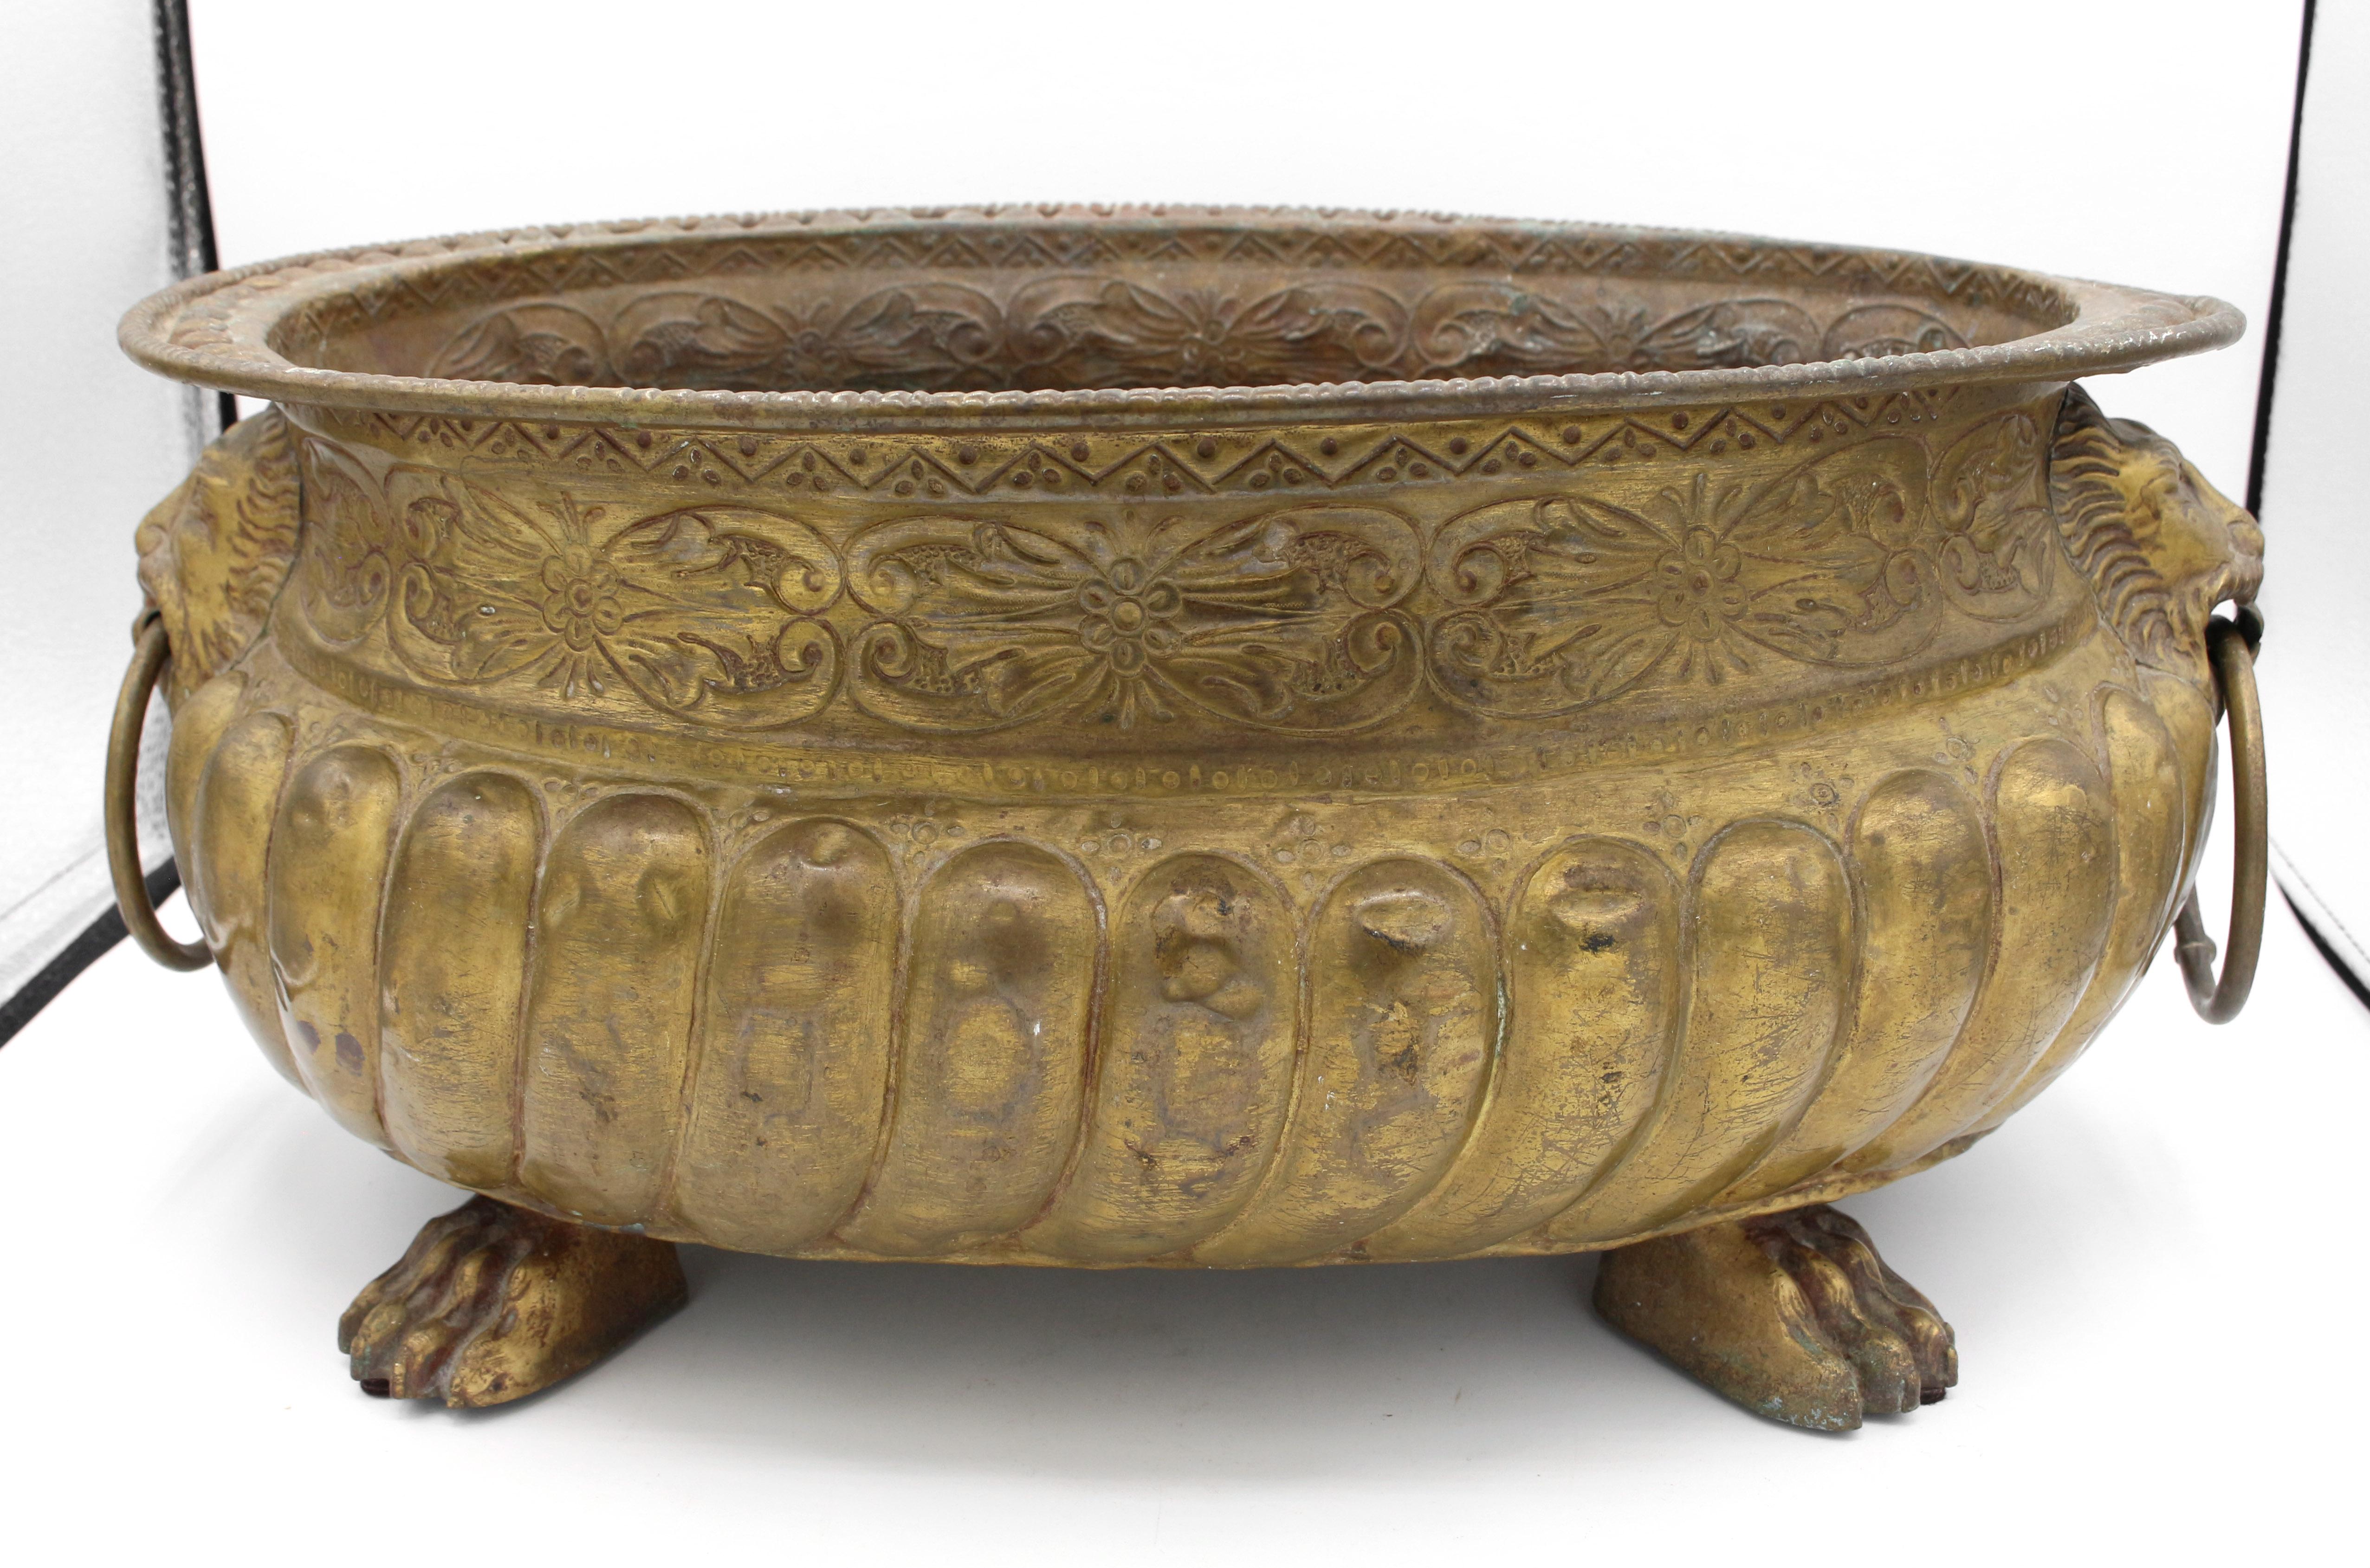 Circa 1860 brass oval jardiniere, French. Superb quality. Heavily gadrooned body surmounted by a frieze of florest & scrolls, lion mask ring turned handles, bold paw feet. Slightly bent rim at corner/edge.
16.5